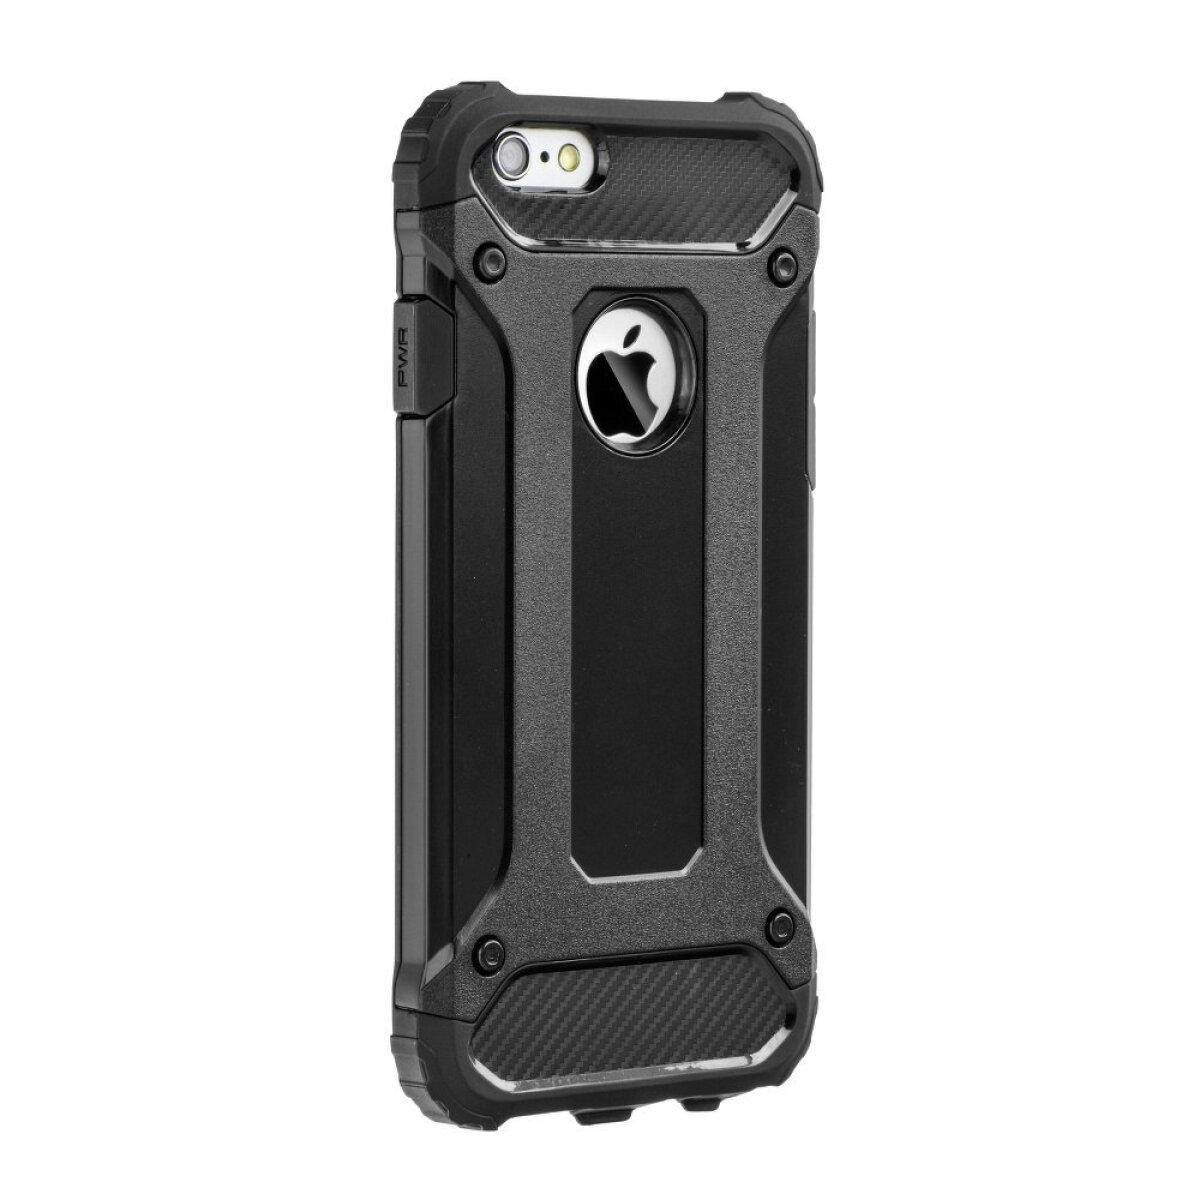 FORCELL ARMOR Case iPhone Bookcover, schwarz, 11 11 iPhone Apple, Pro, Schwarz Pro